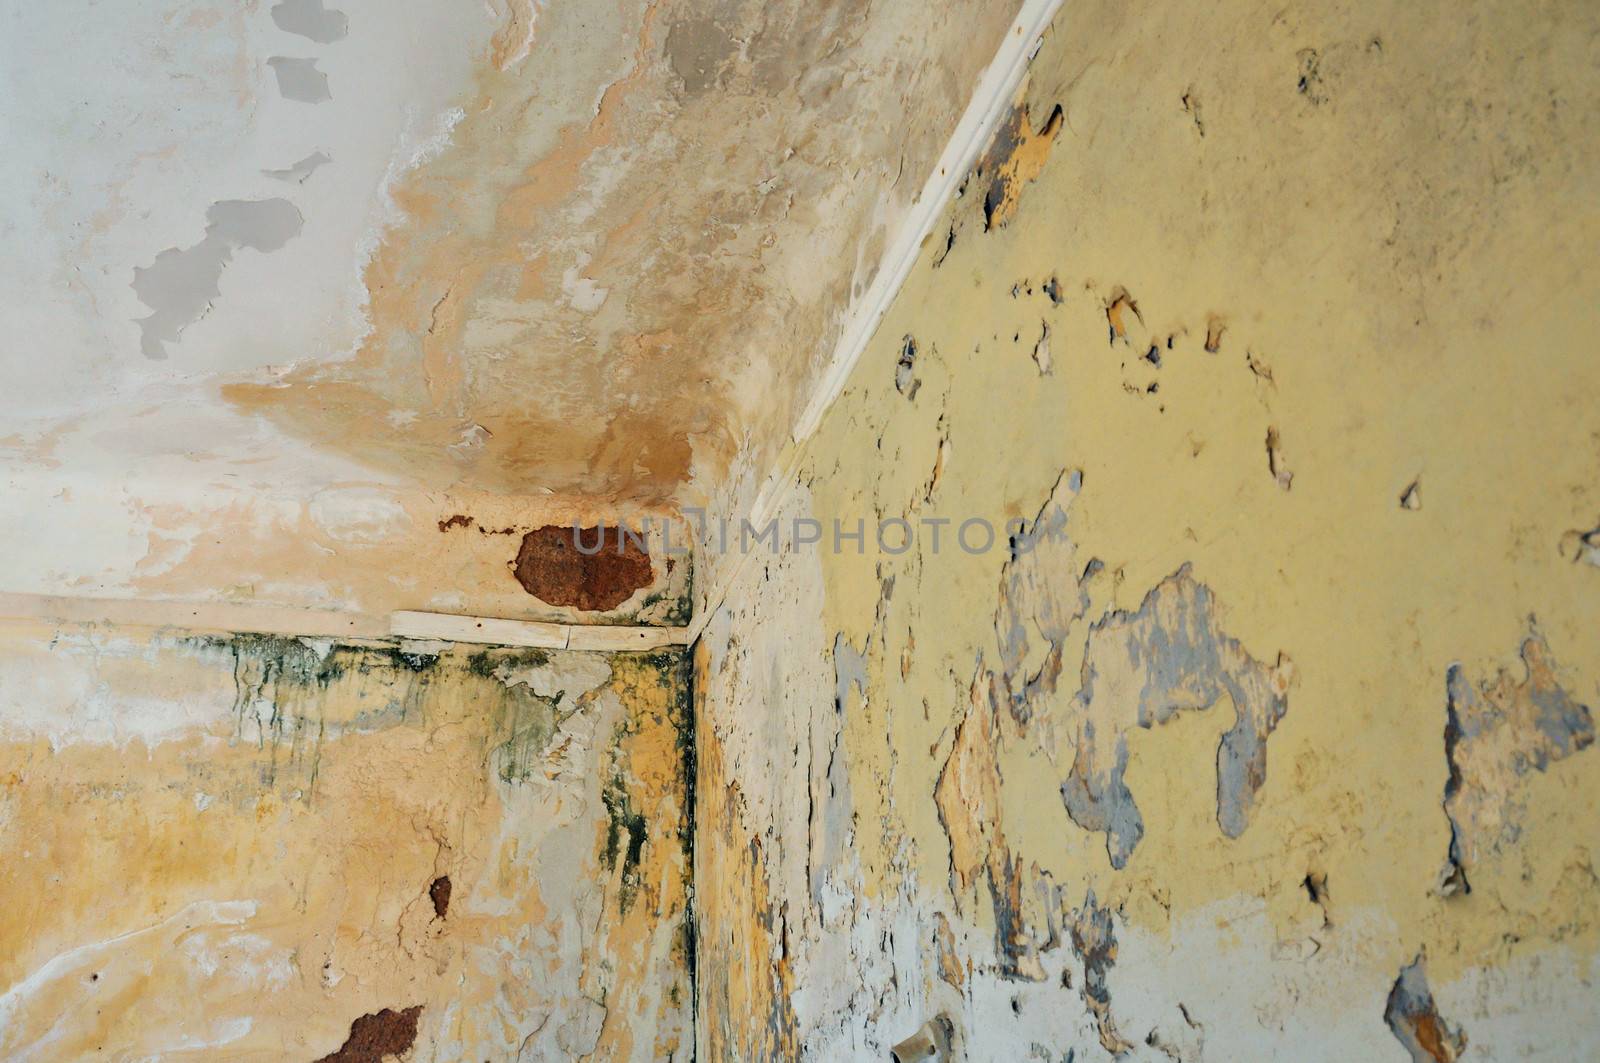 Mold and chipped paint on the wall and ceiling of an abandoned house.